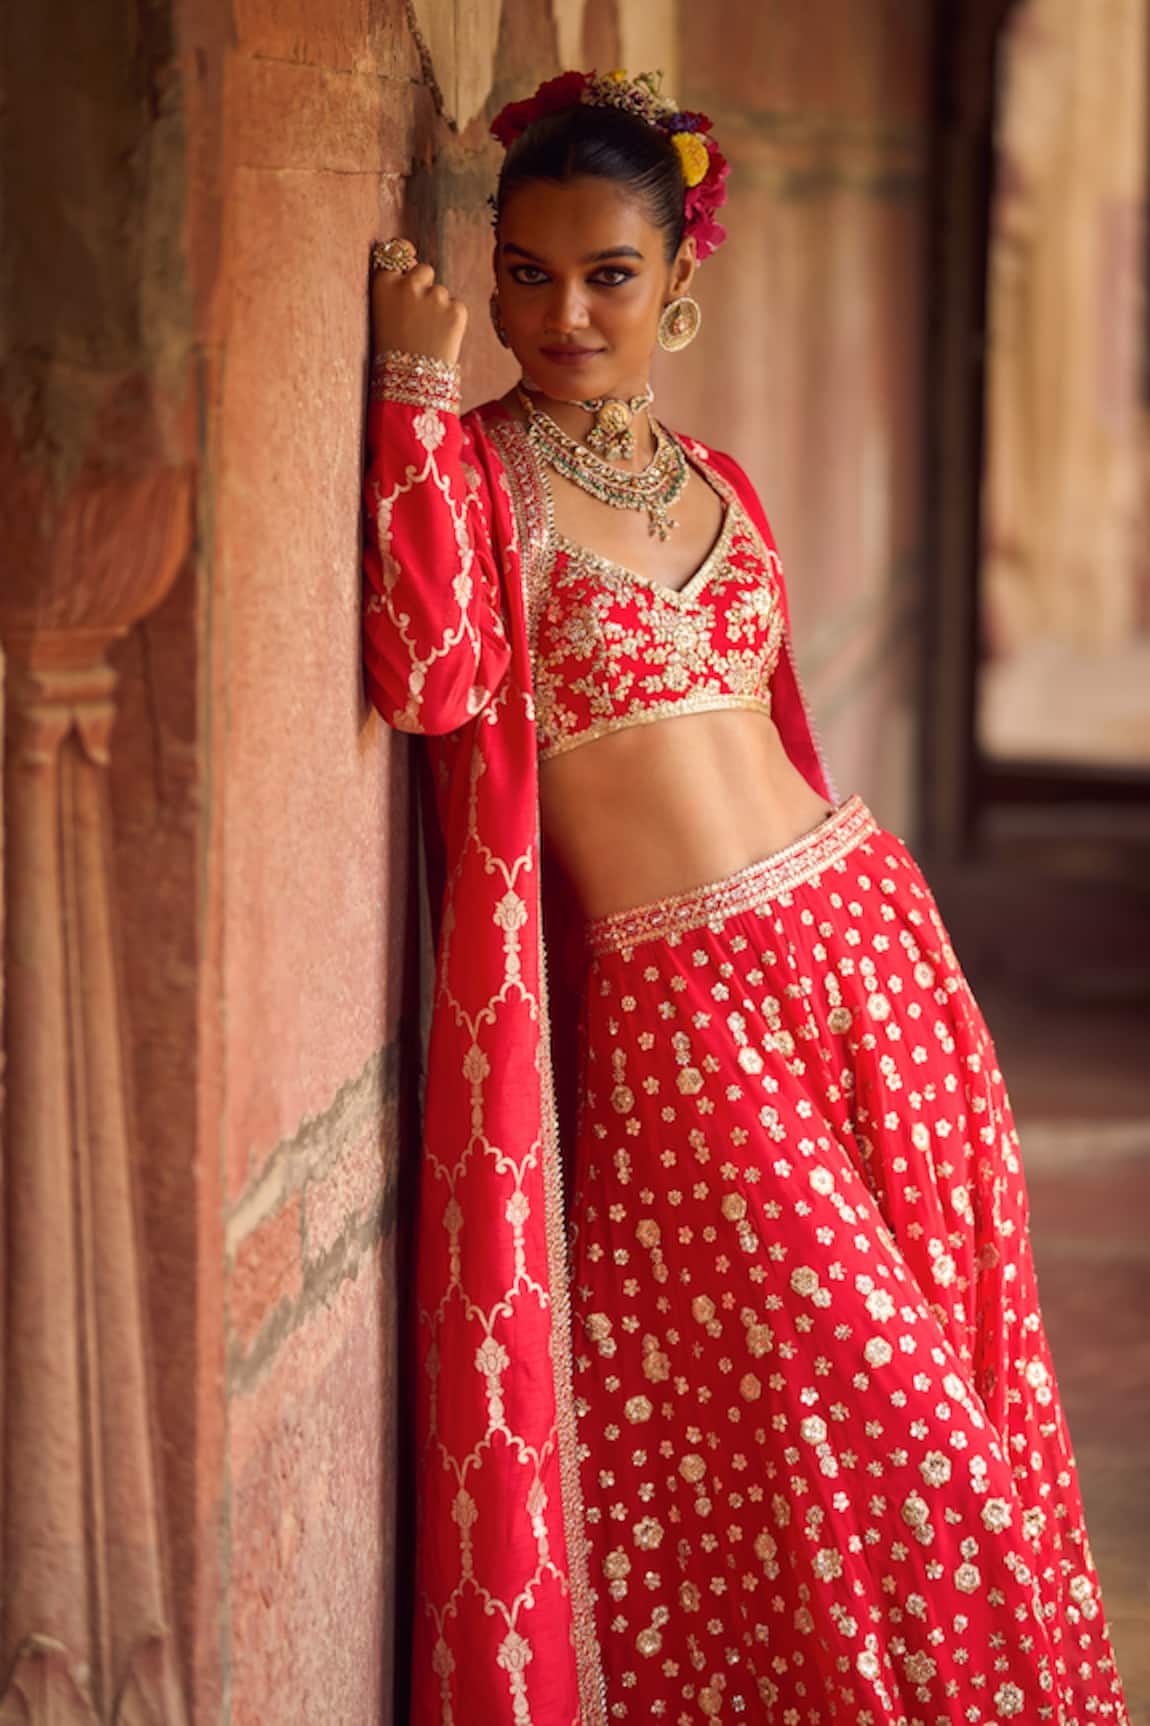 6 Jaw-dropping Jewellery for Lehenga to Ace Your Bridal Look